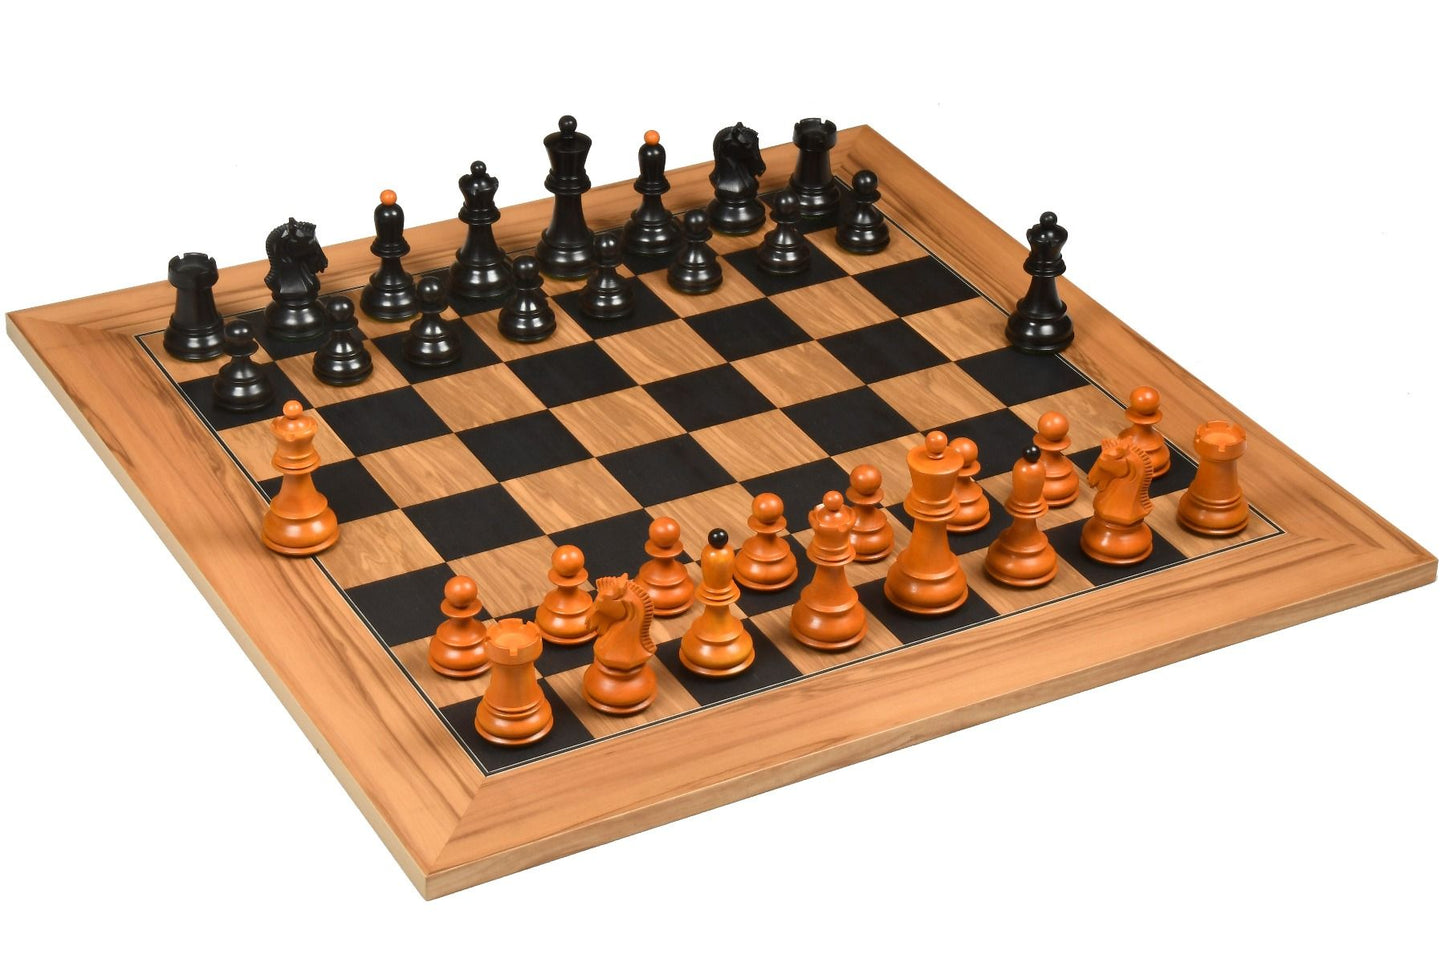 Combo of 1950 Reproduced Dubrovnik Bobby Fischer Chessmen Version 3.0 in Ebonized & Antiqued boxwood - 3.7" King with Wooden Chess Board 22" - 55 mm